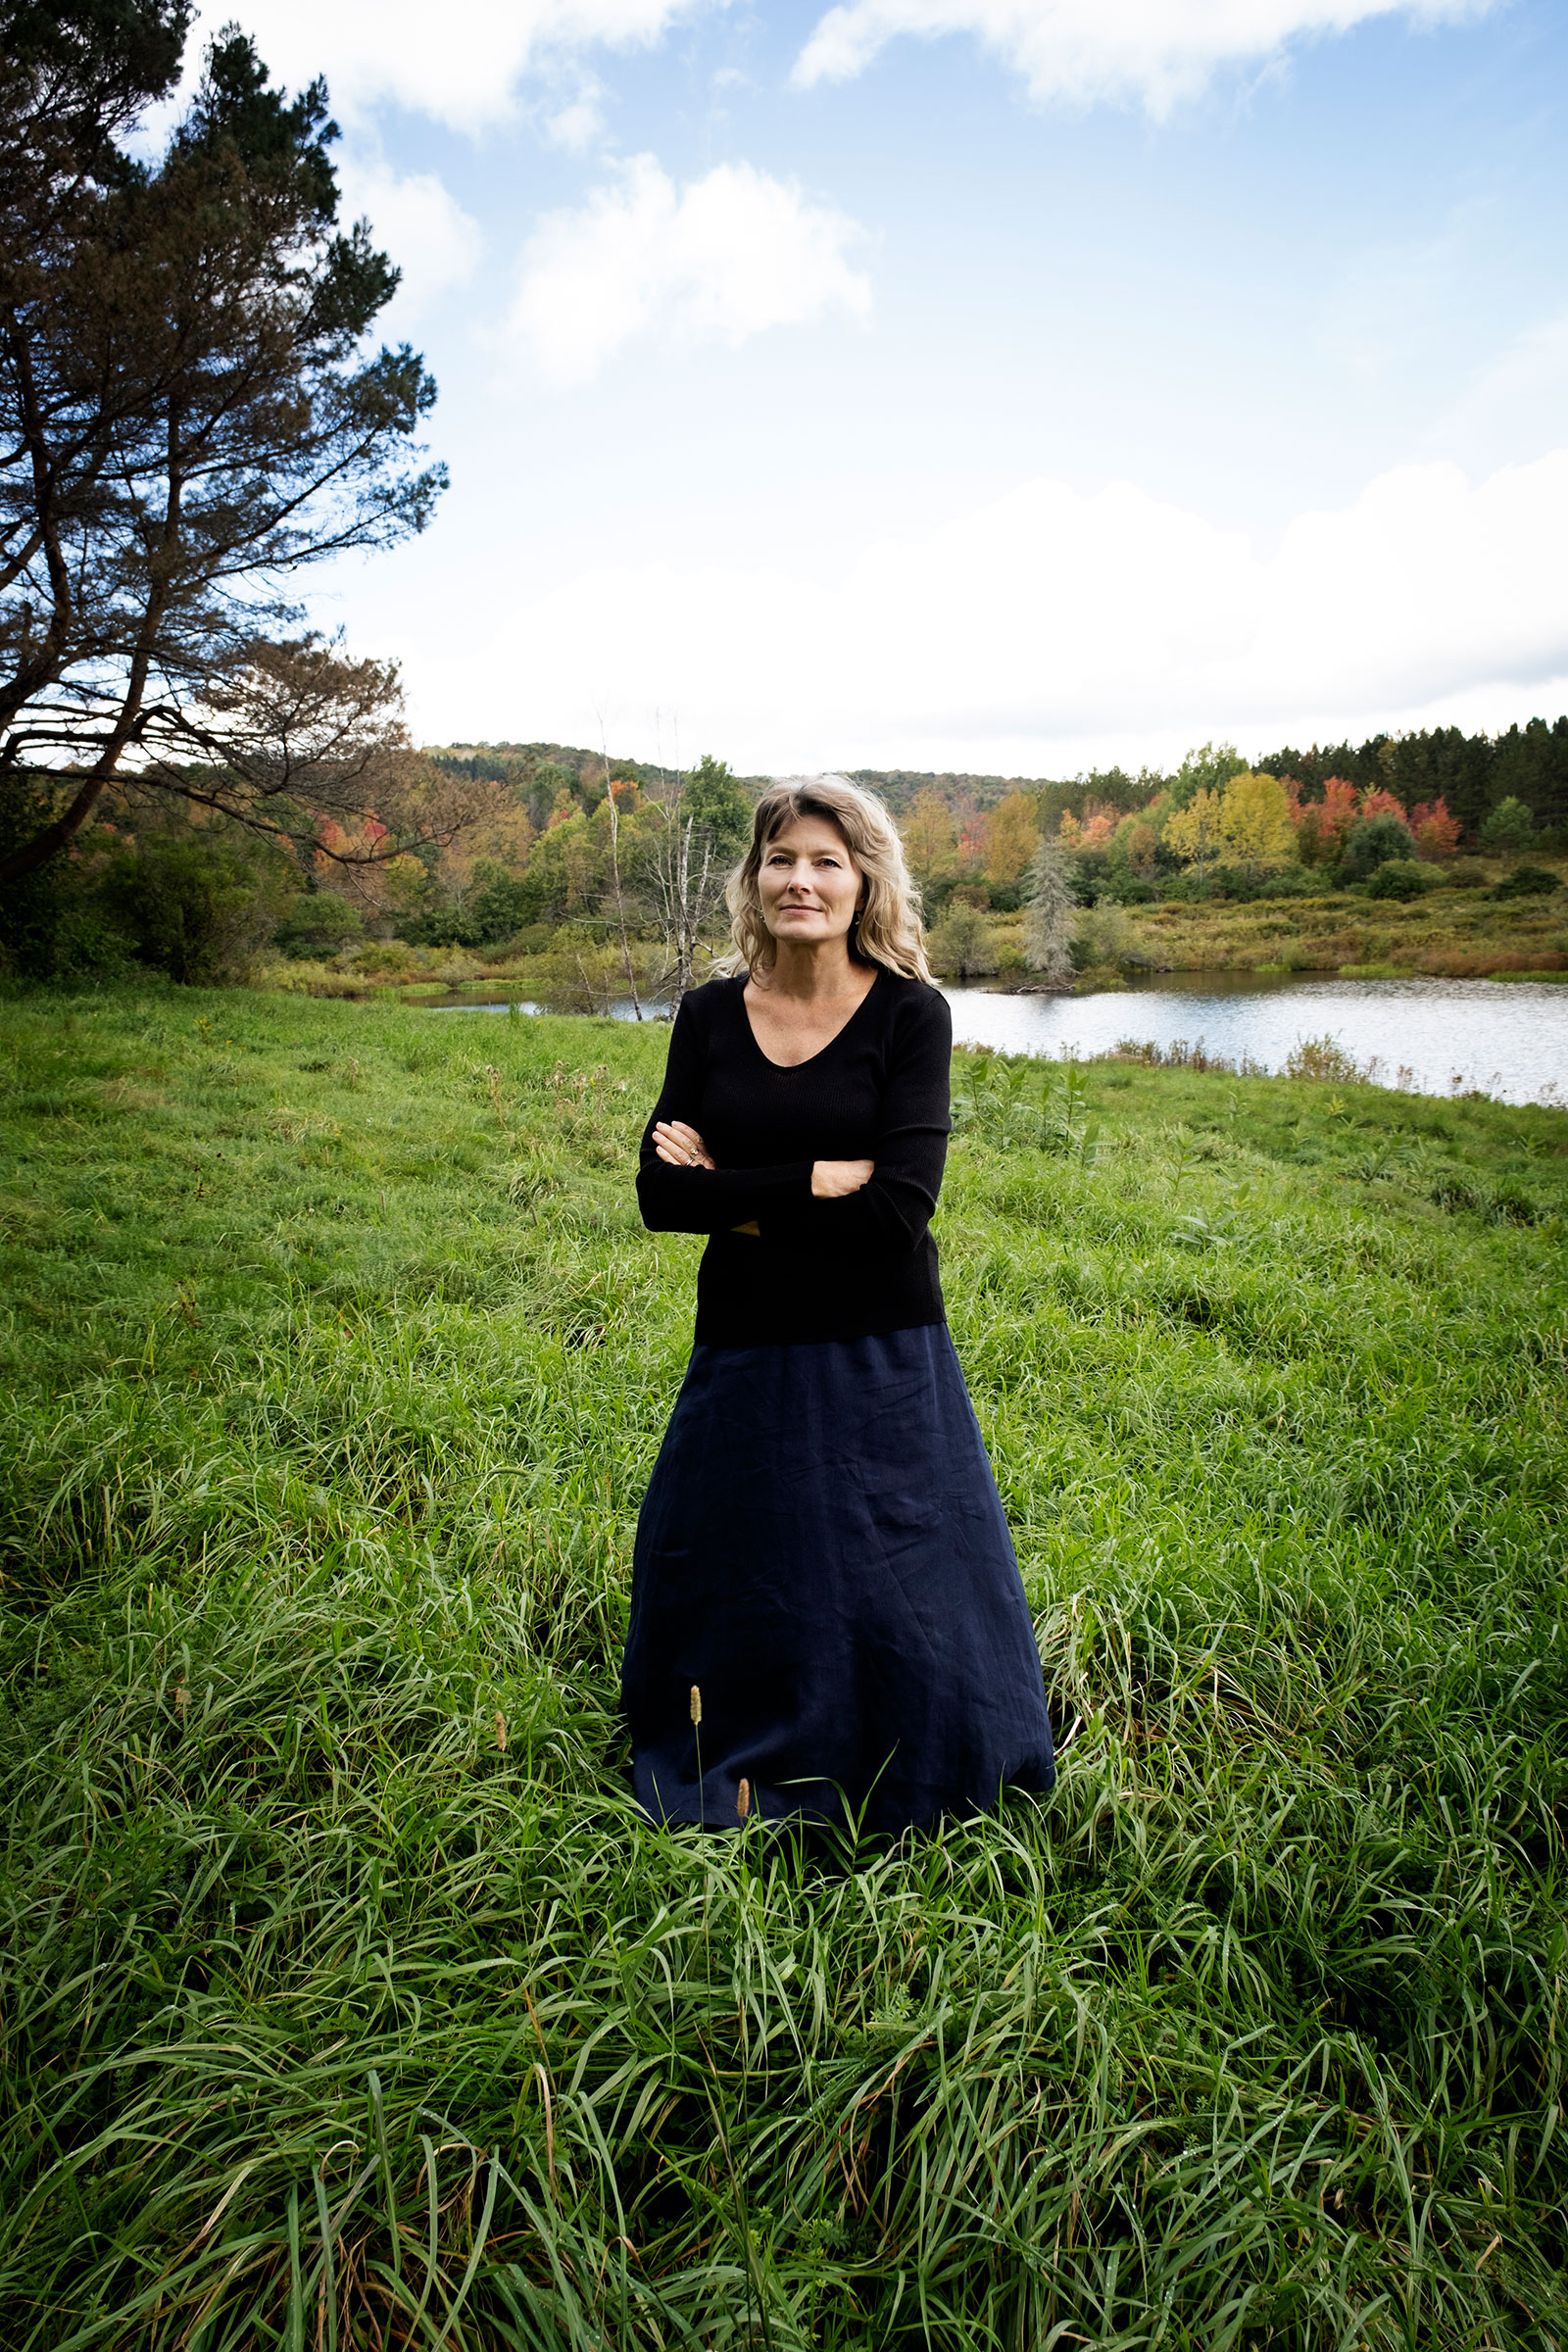 Jennifer Egan is set to publish "The Candy House," the follow-up to her Pulitzer Prize-winning 2010 novel "A Visit From the Goon Squad," on April 5. (Pieter M. Van Hattem)